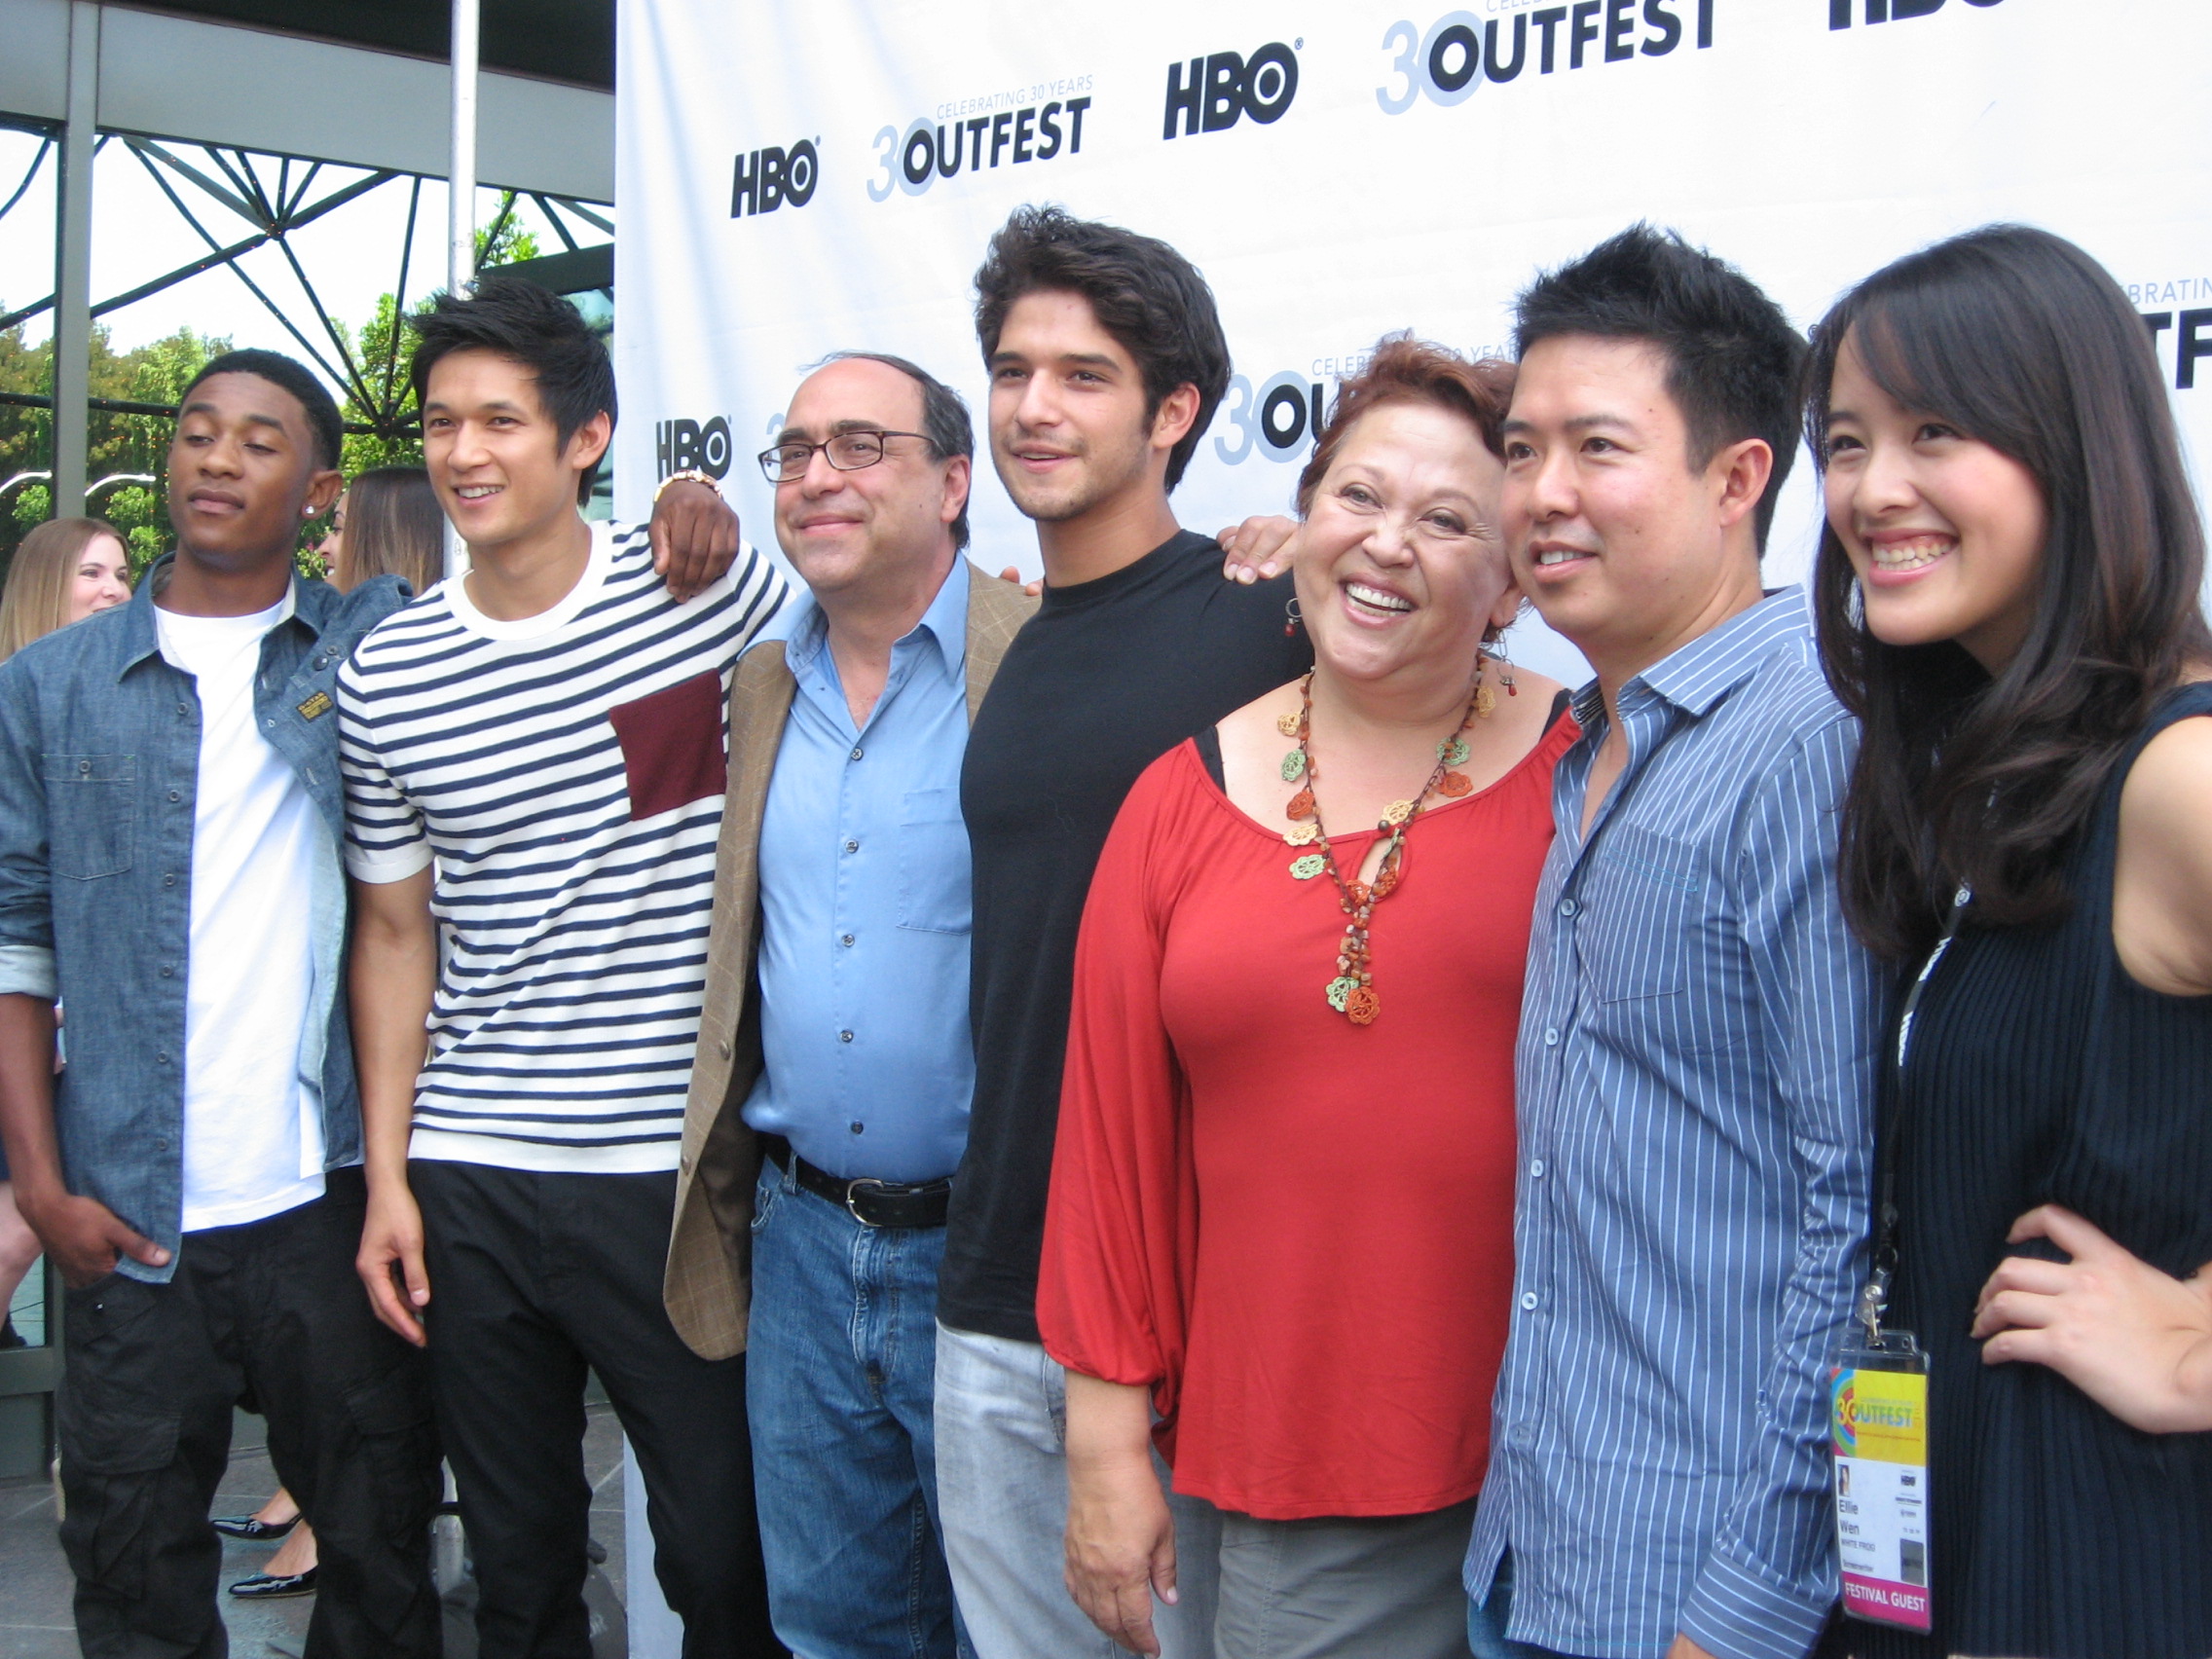 Cast and crew on the red carpet at the Outfest screening (Ellie Wen in foreground). 